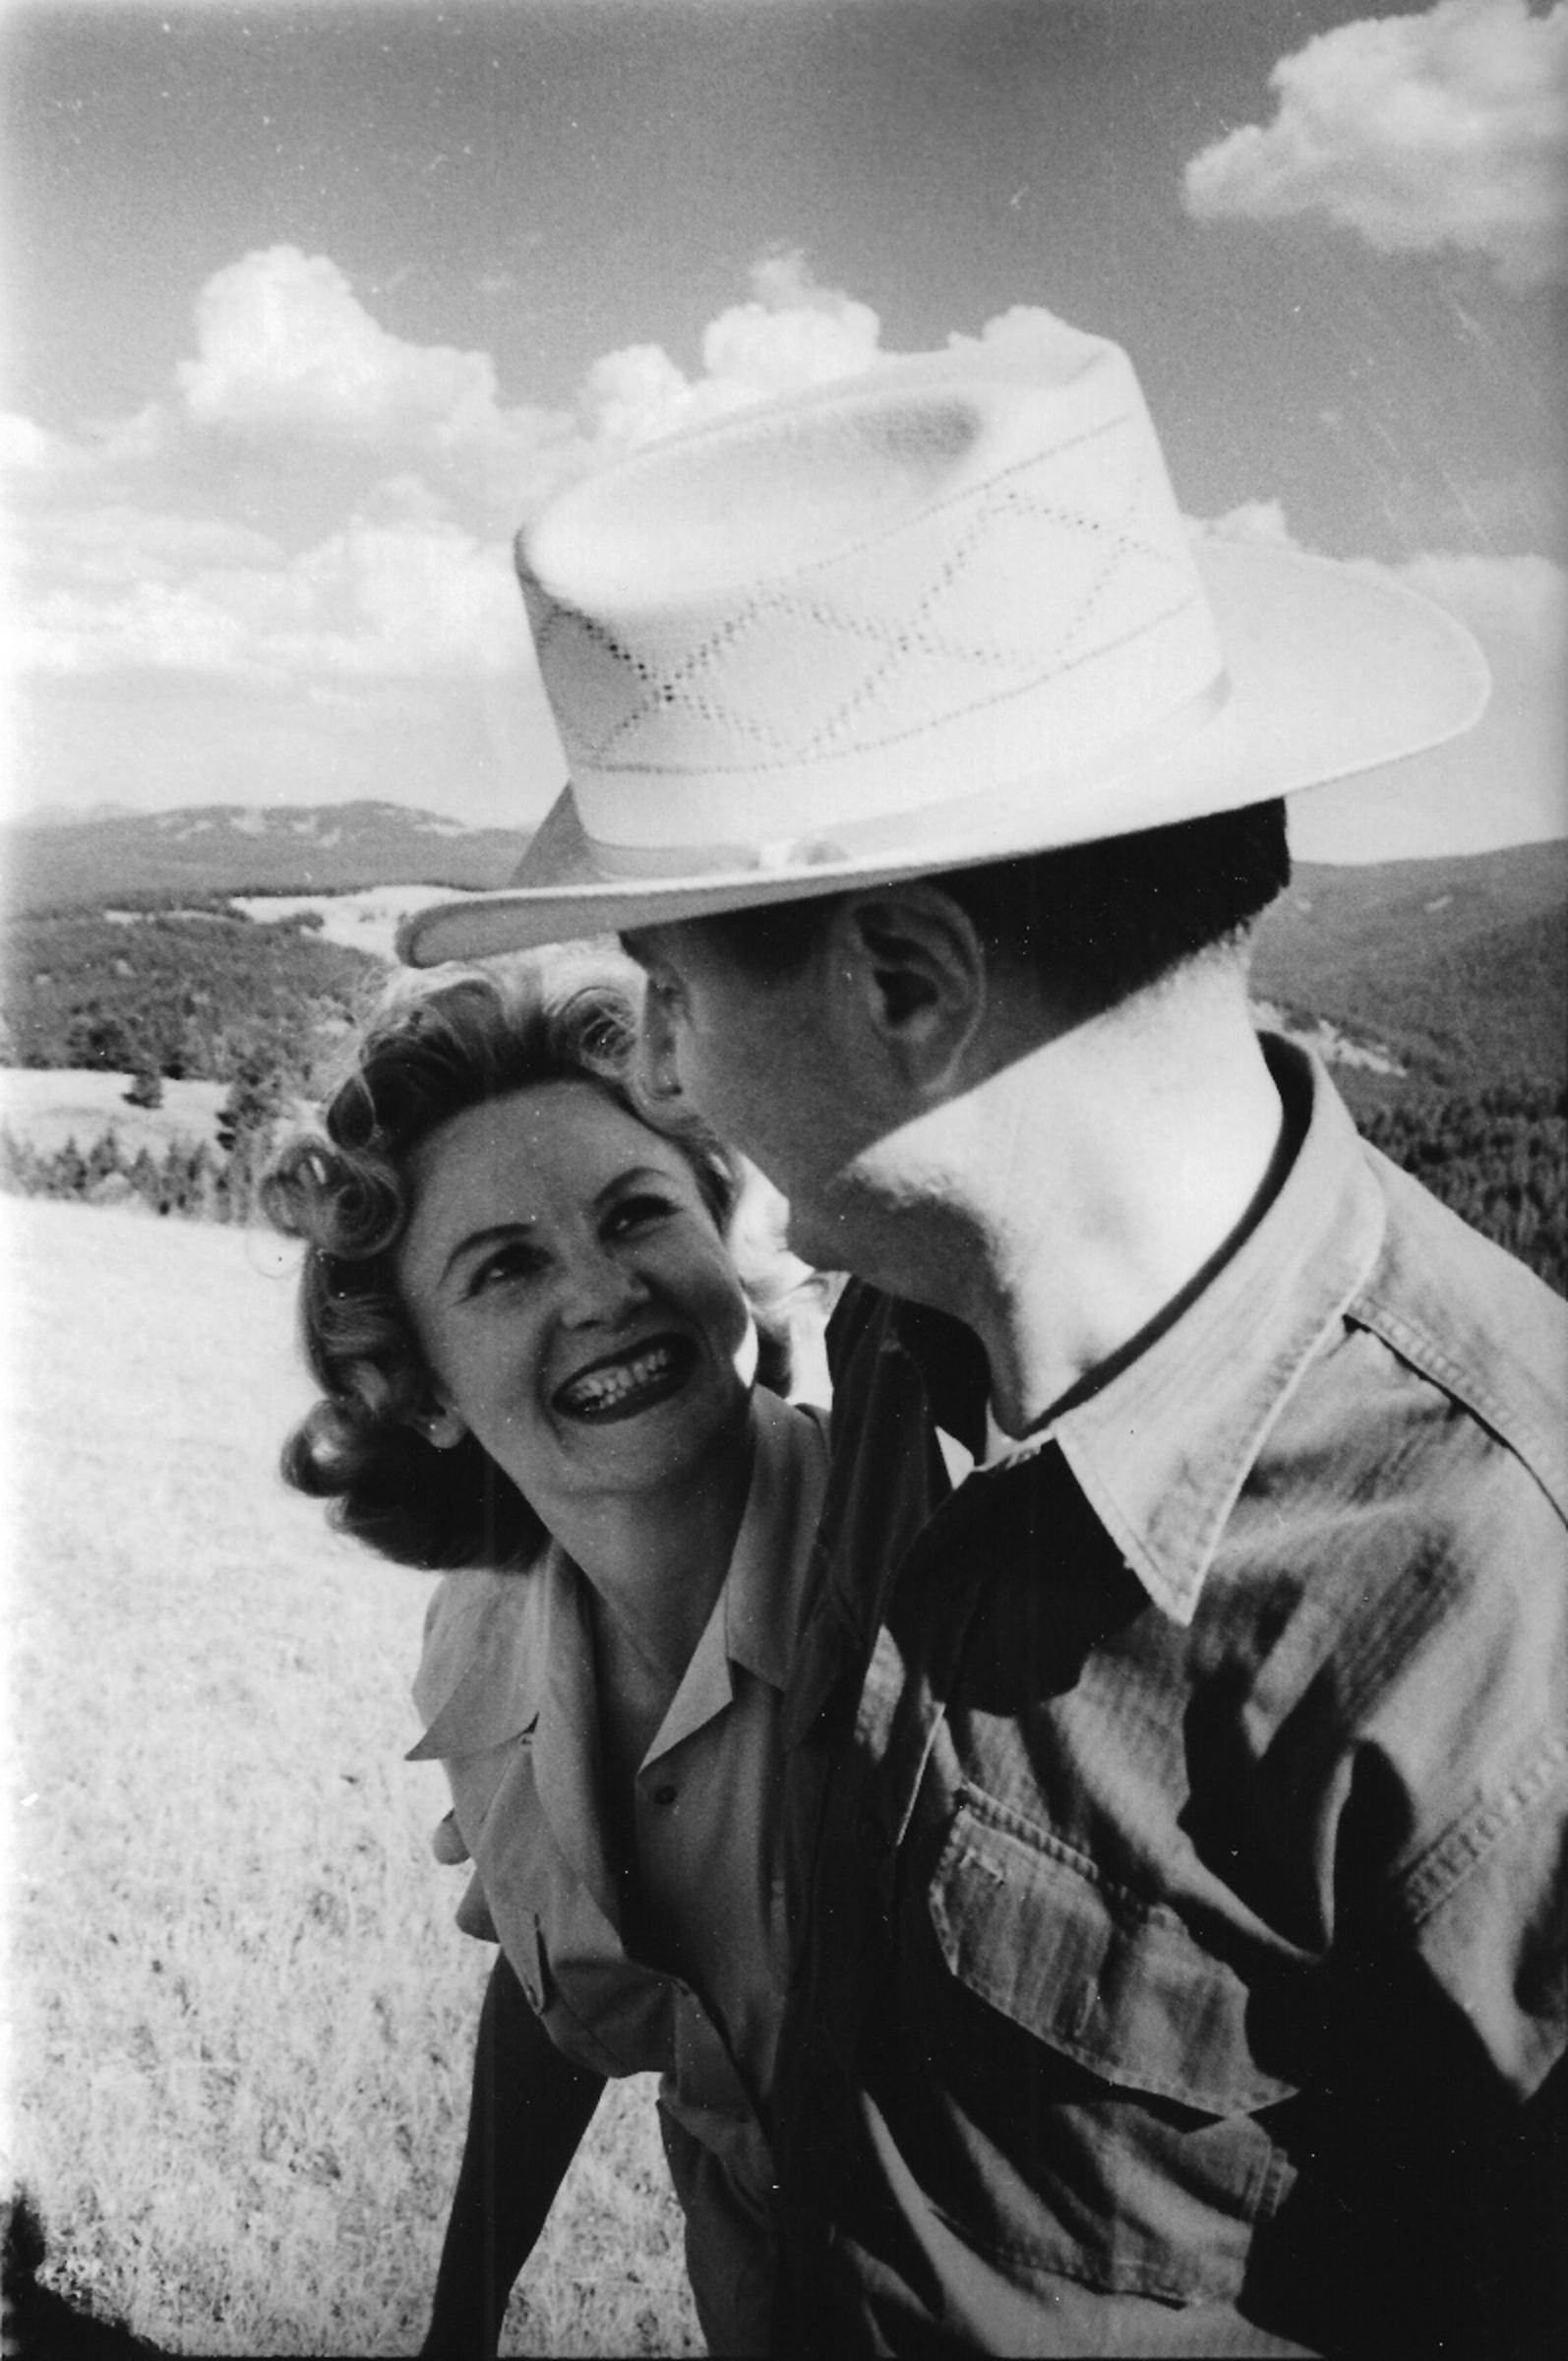 Bob and Ann Staffanson in the West they loved. Despite a distinguished partnership in classical music, homesickness for Montana brought them back to the mountains and plains.